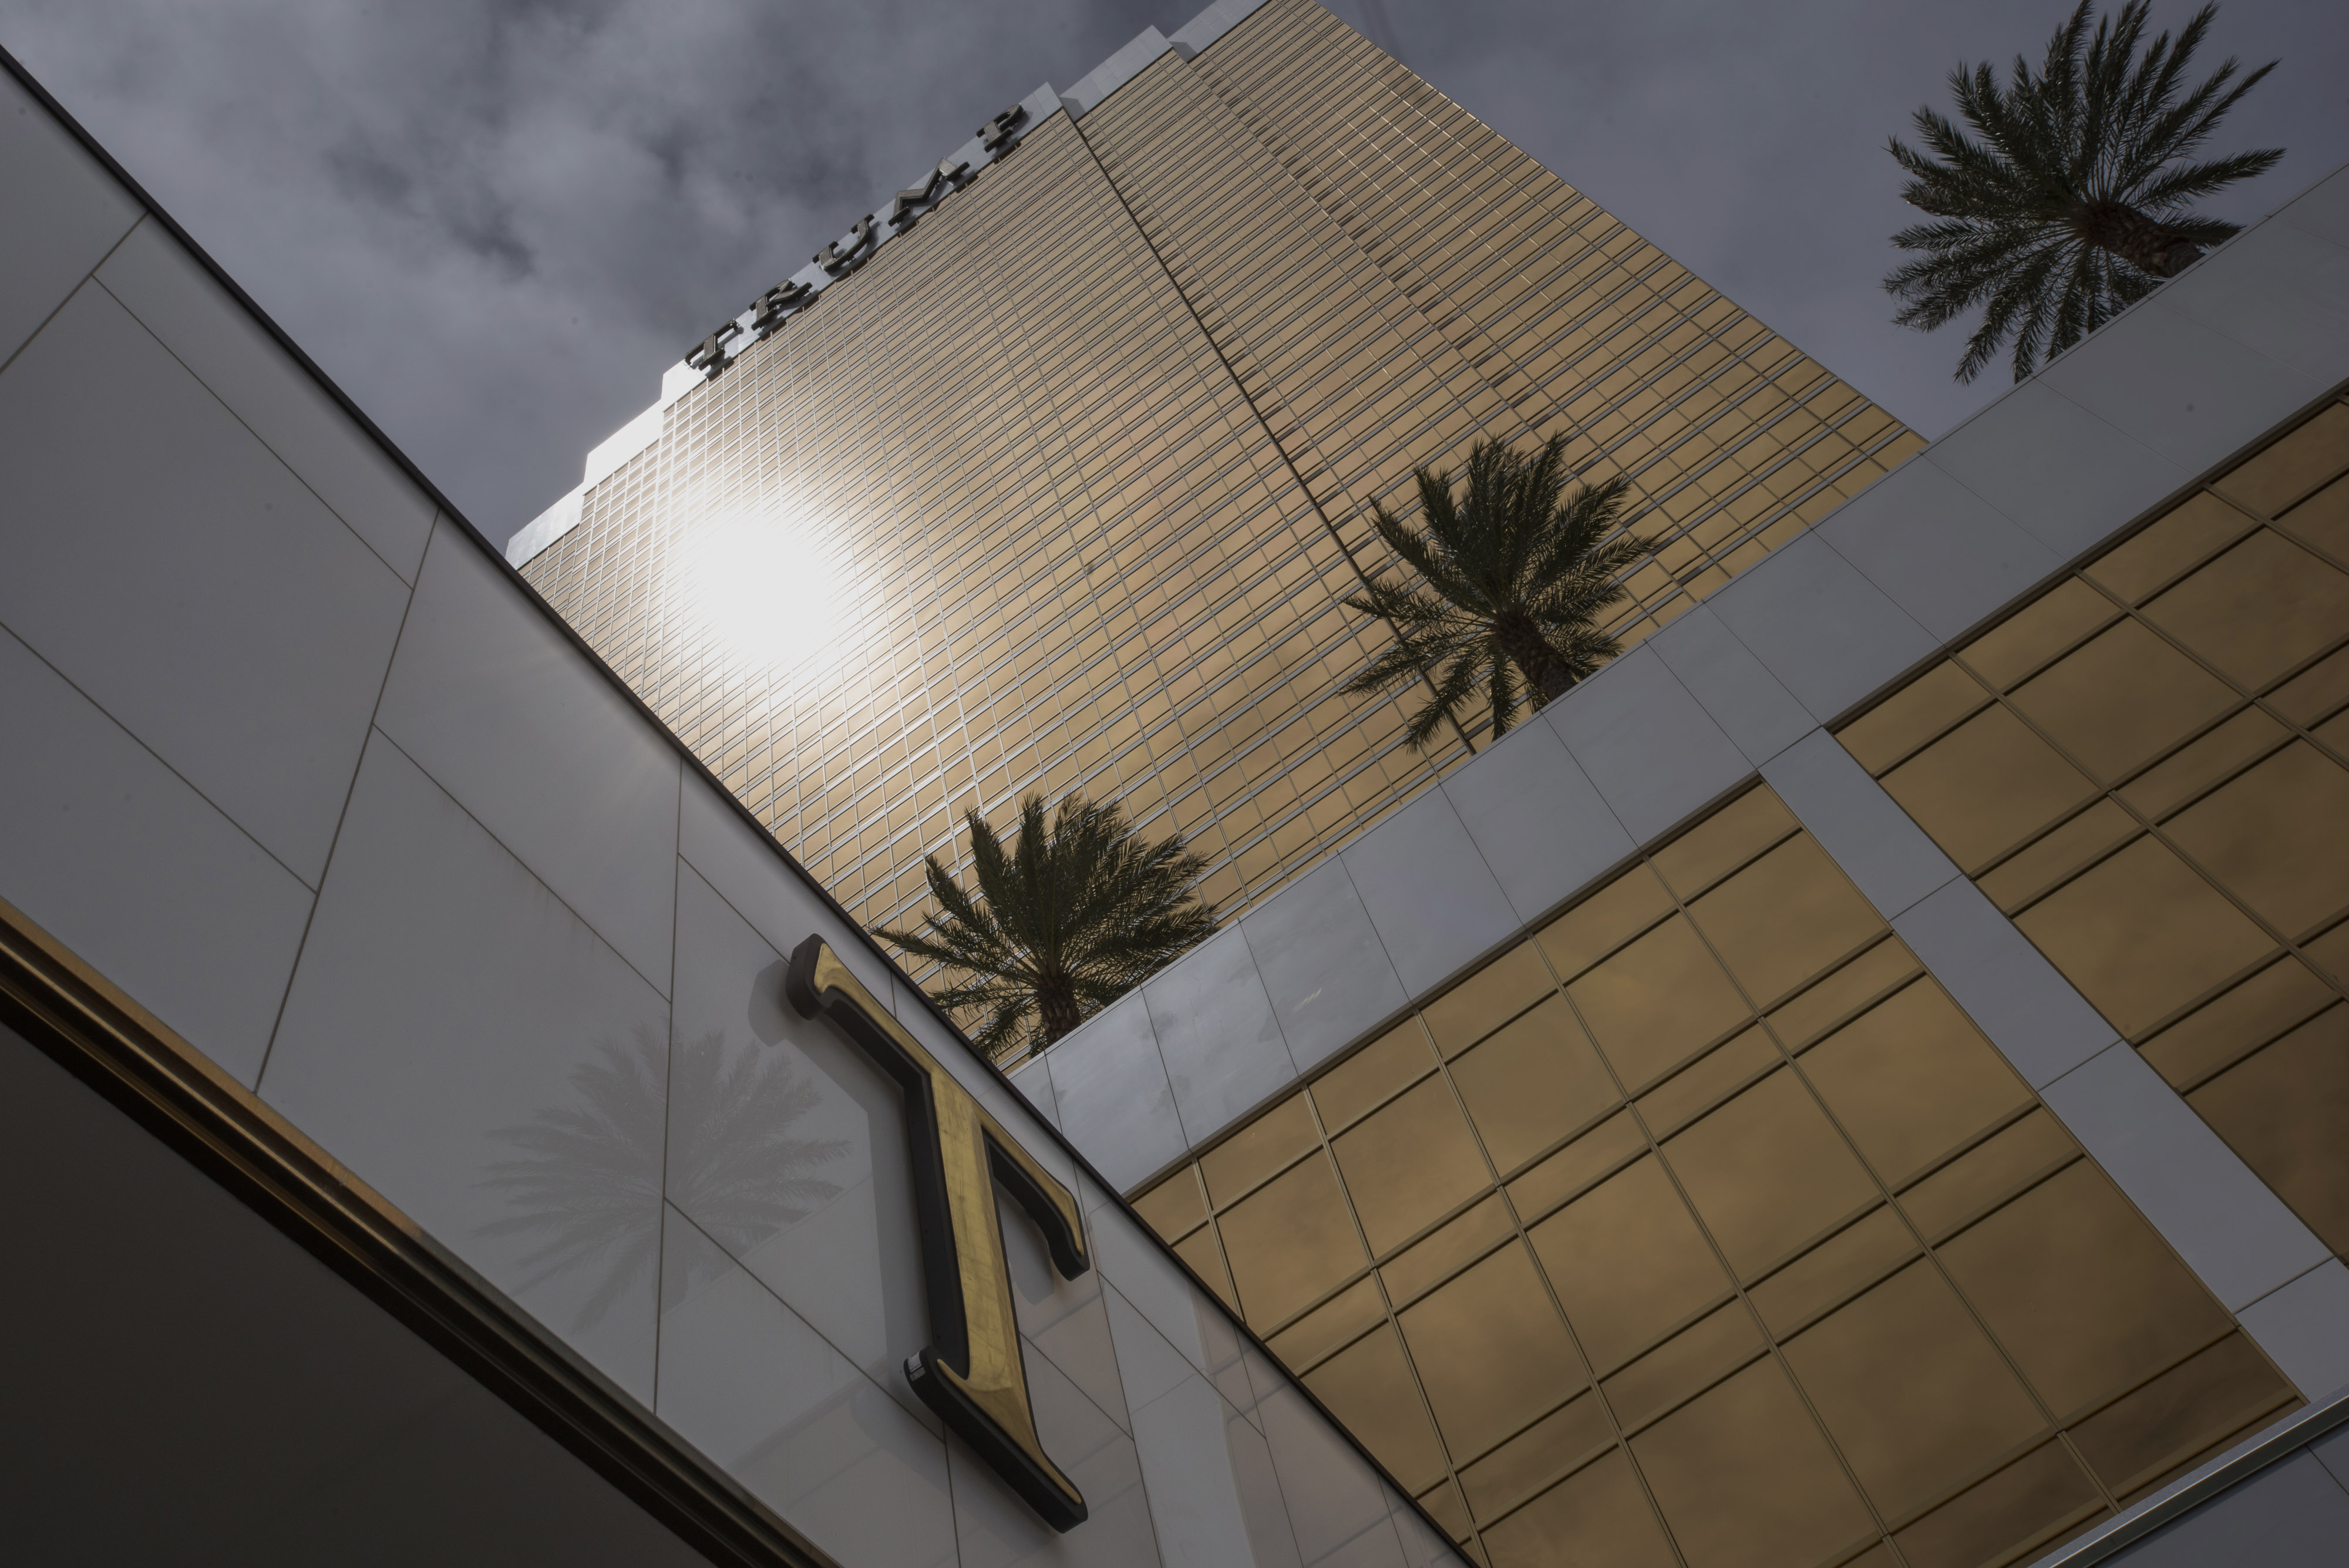 The Trump International Hotel stands in Las Vegas, Nevada on Aug. 5, 2015. (David Paul Morris—Bloomberg/Getty Images)